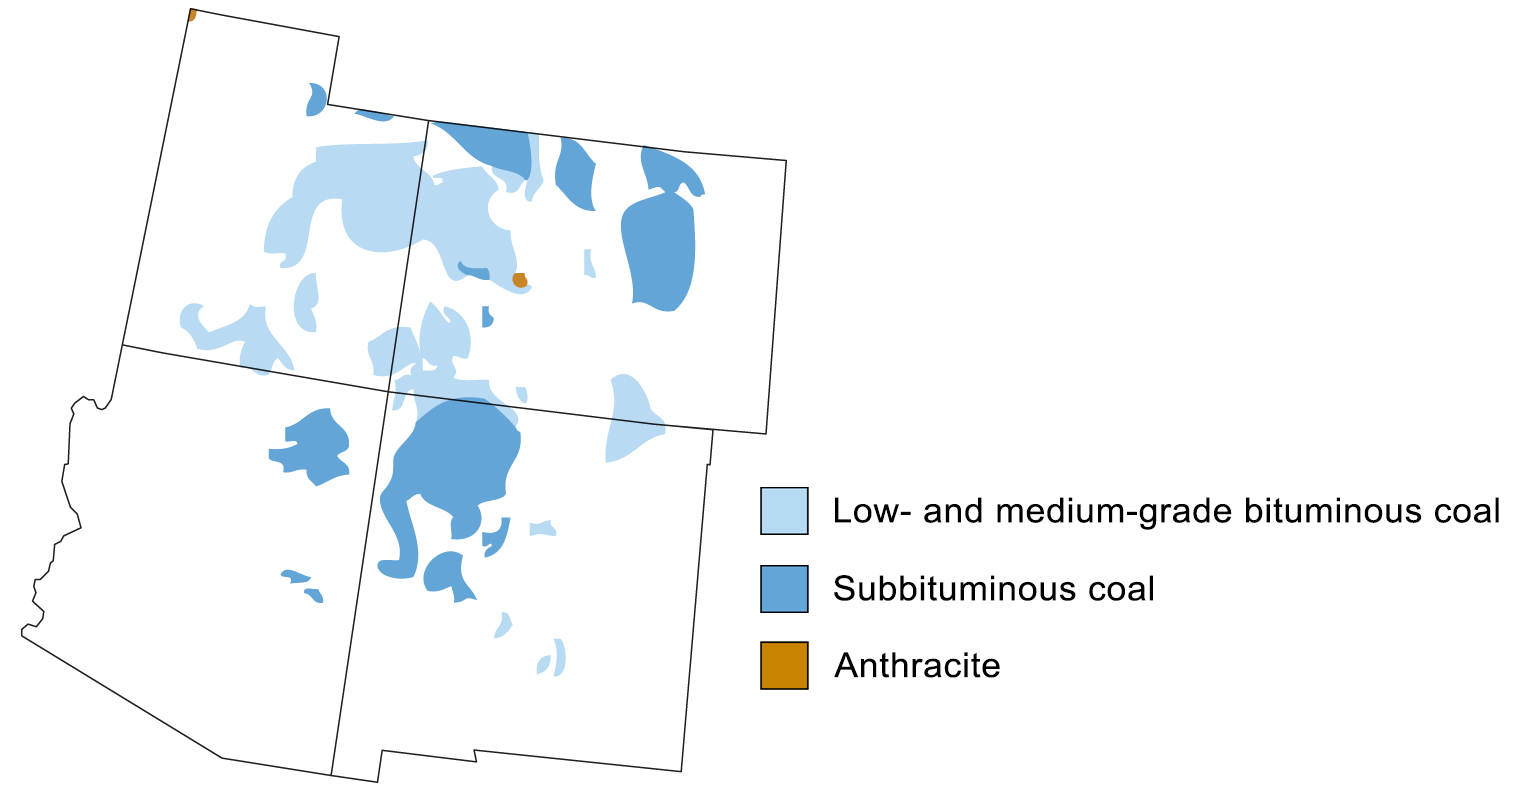 Map showing the four southwestern states (Arizona, Colorado, New Mexico, and Utah) with coal deposits mapped. Low and medium-grade bituminous coal are in light blue, subbituminous coal is medium blue, and anthracite is orangish. Most coals are in eastern Utah, western and eastern Colorado, and northwestern New Mexico, and northeastern Arizona.